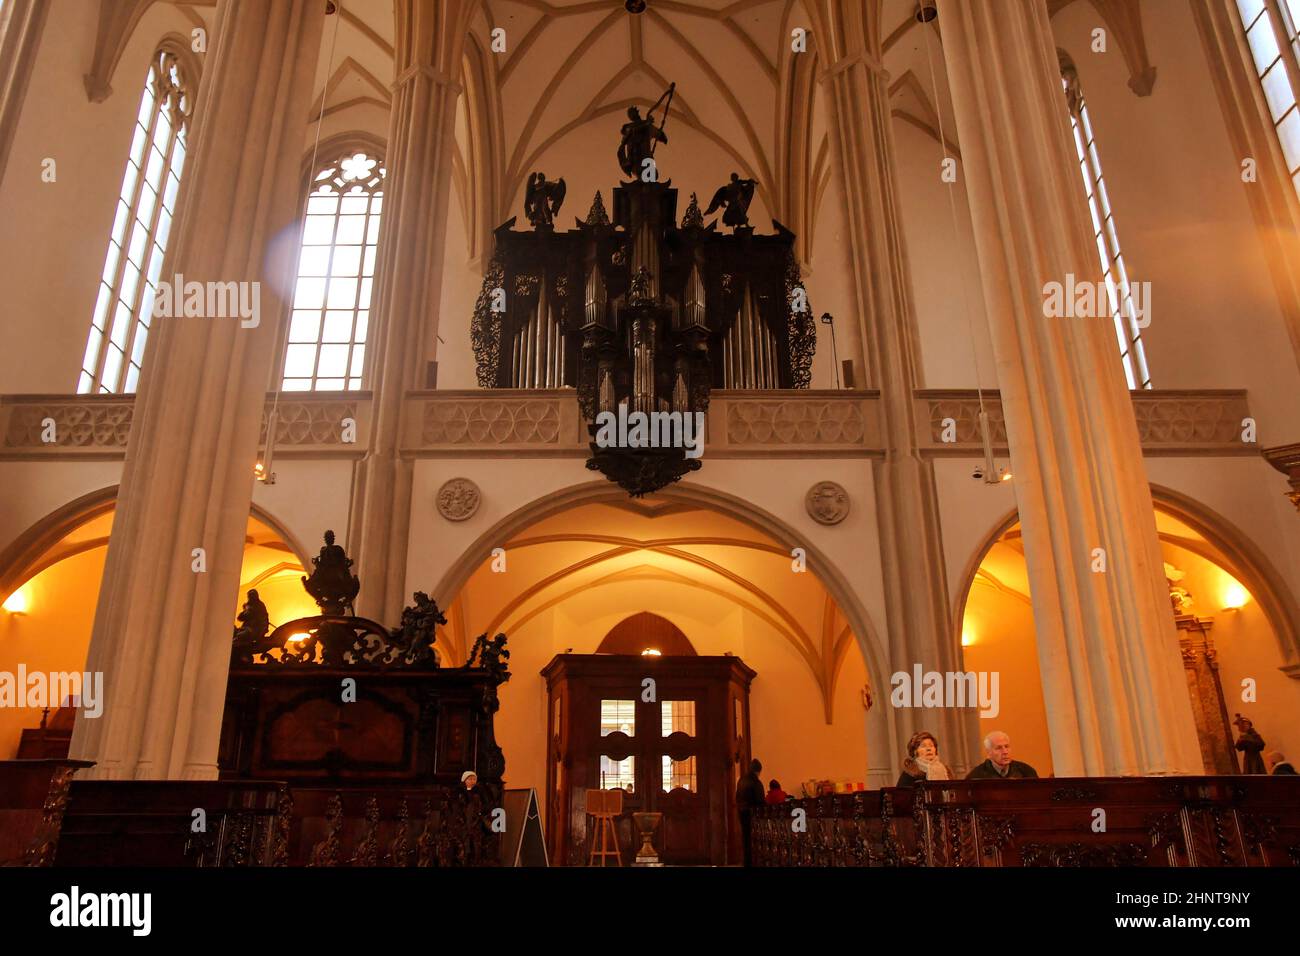 The Church of St. Jacob the Elder is a late Gothic three-nave hall church located on the Jakub Square in the Brno Stock Photo